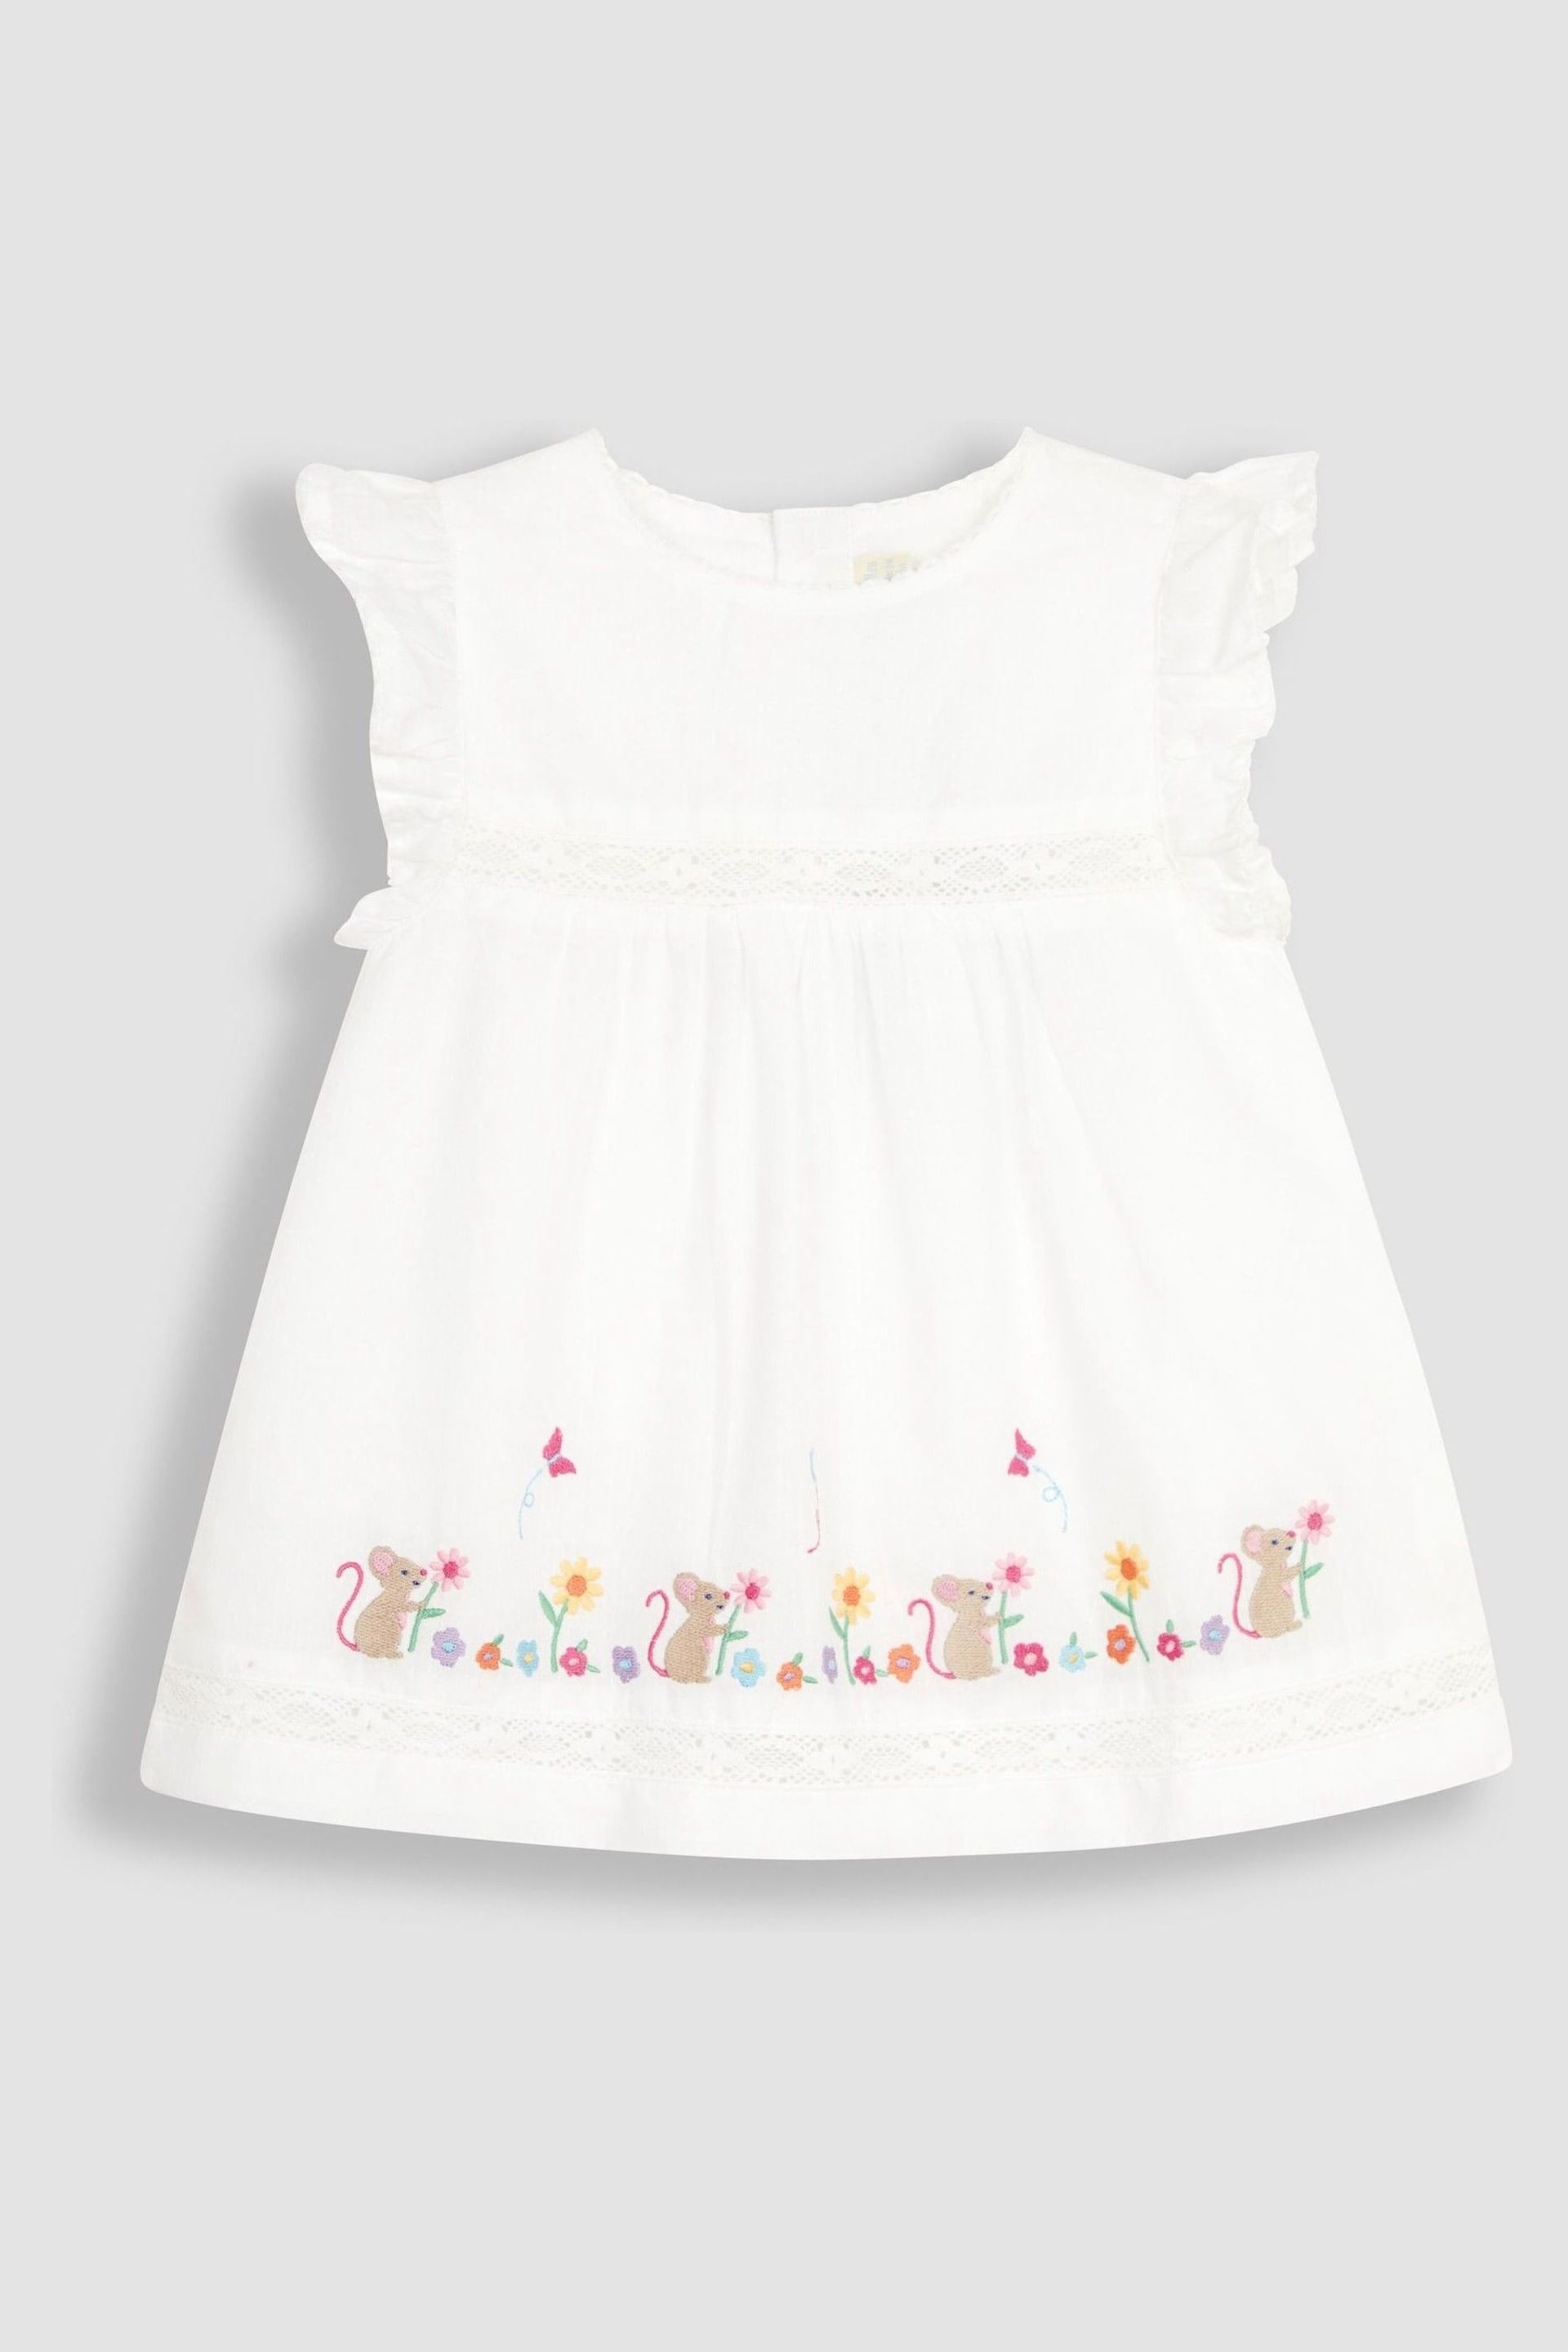 JoJo Maman Bébé White Mouse Embroidered Pretty Blouse - Image 1 of 3